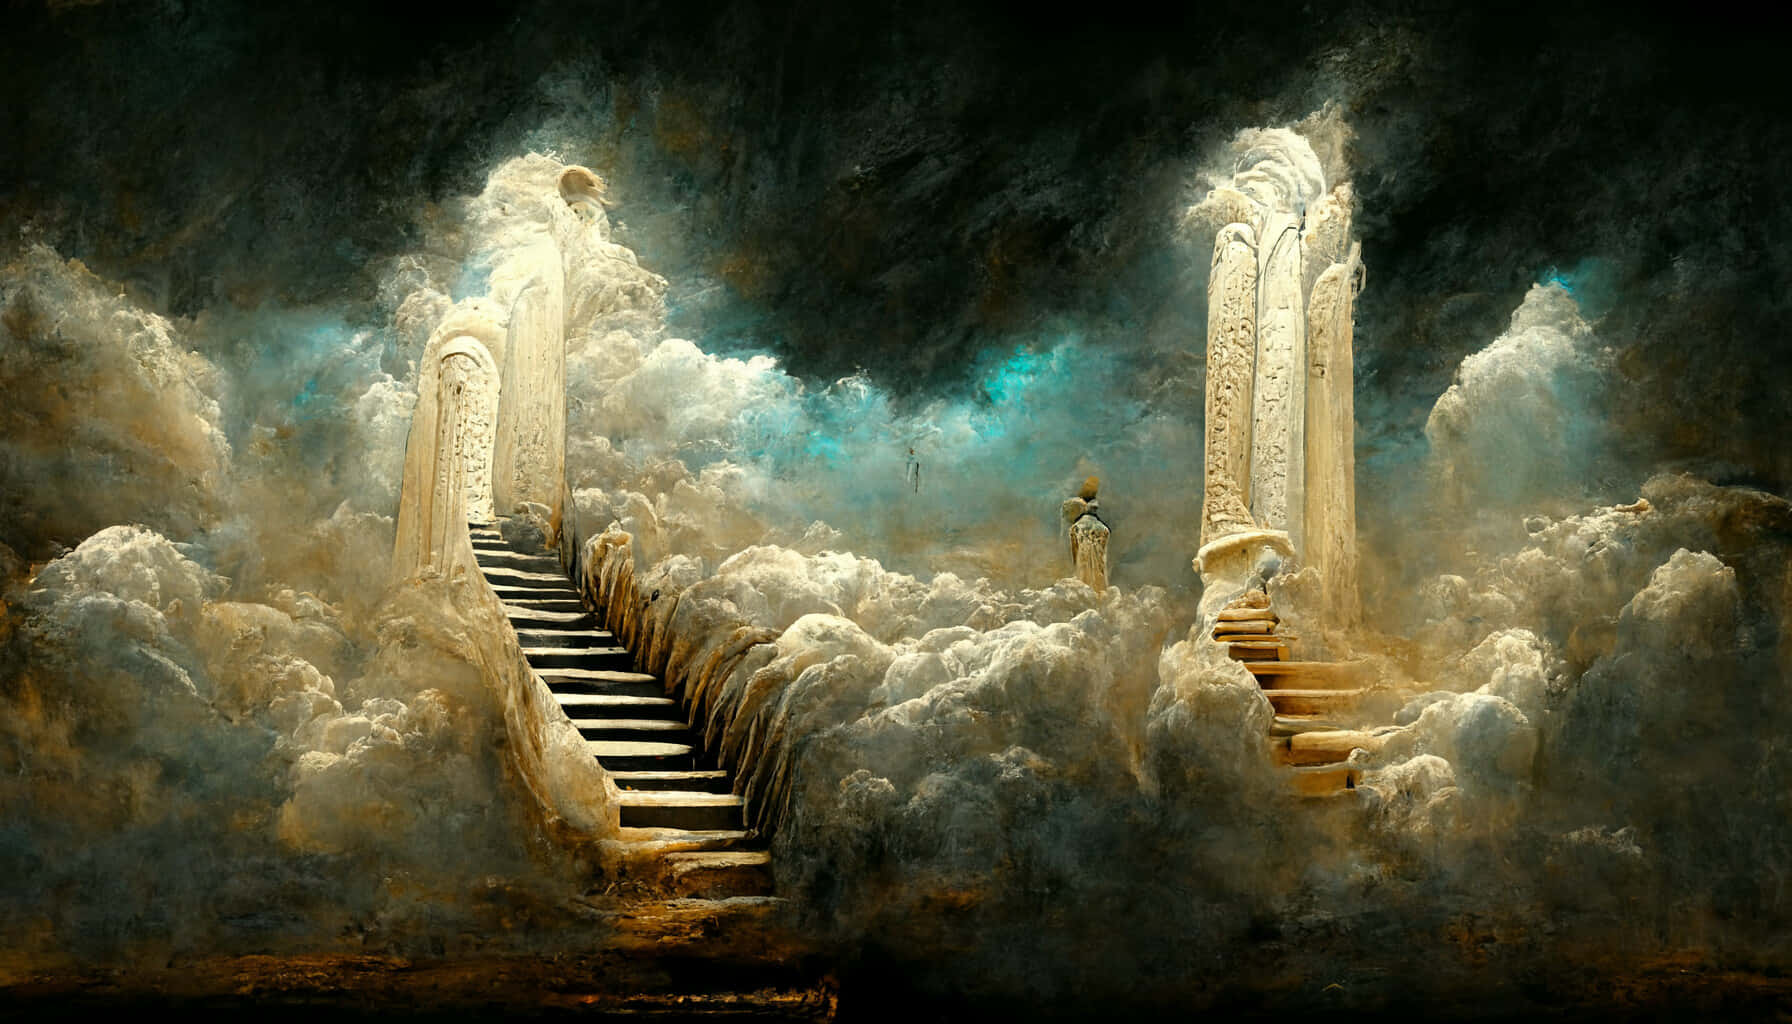 Enchanting Stairway to Heaven amidst a dreamy landscape